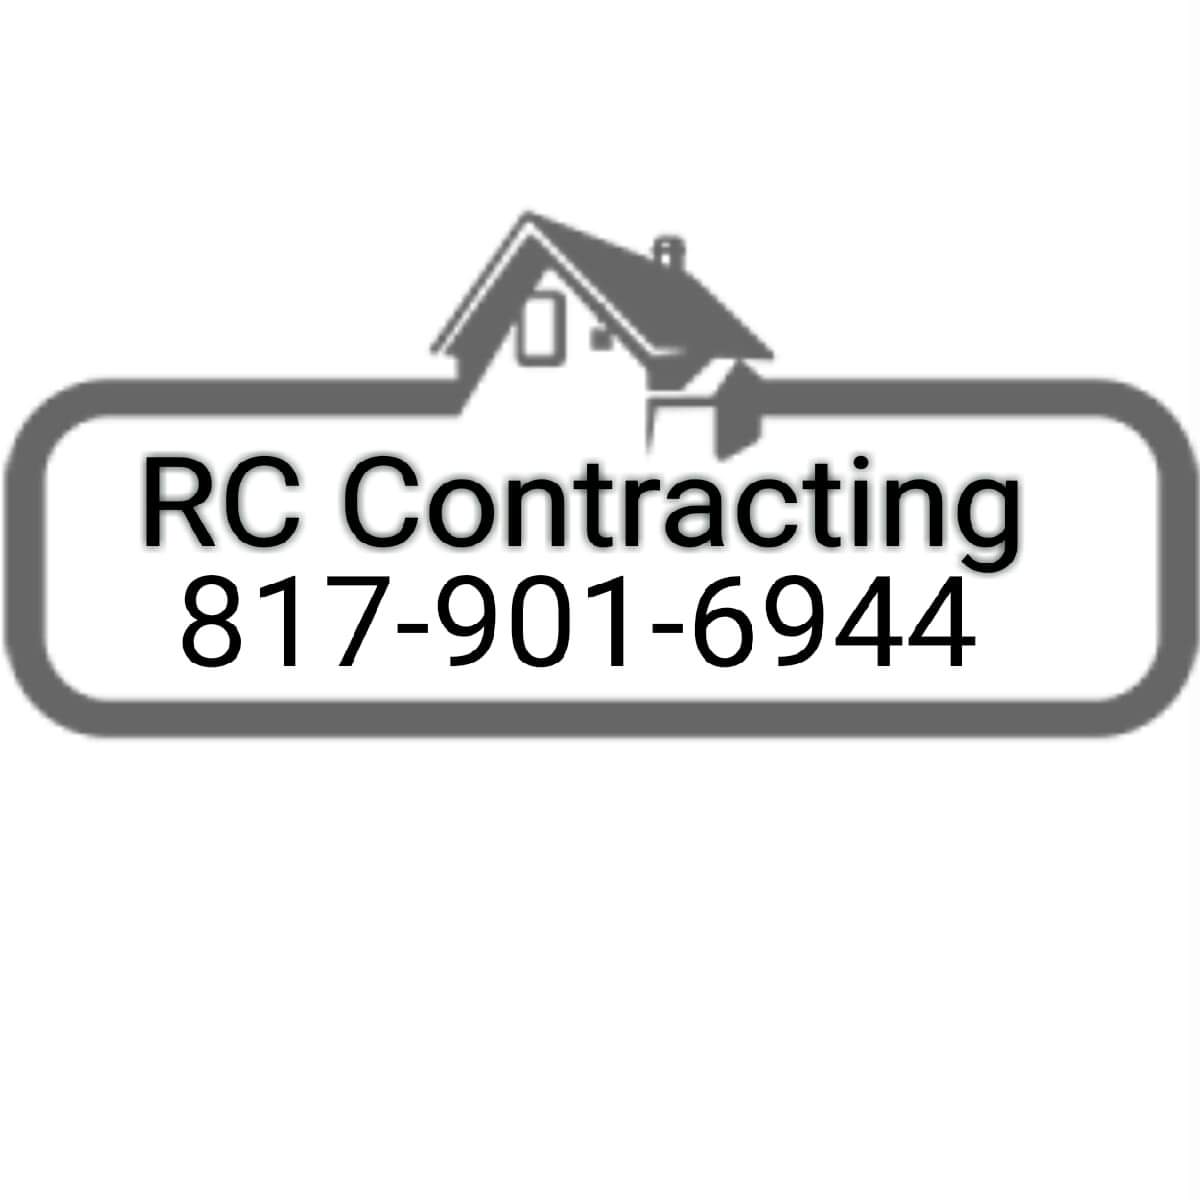 RC Contracting